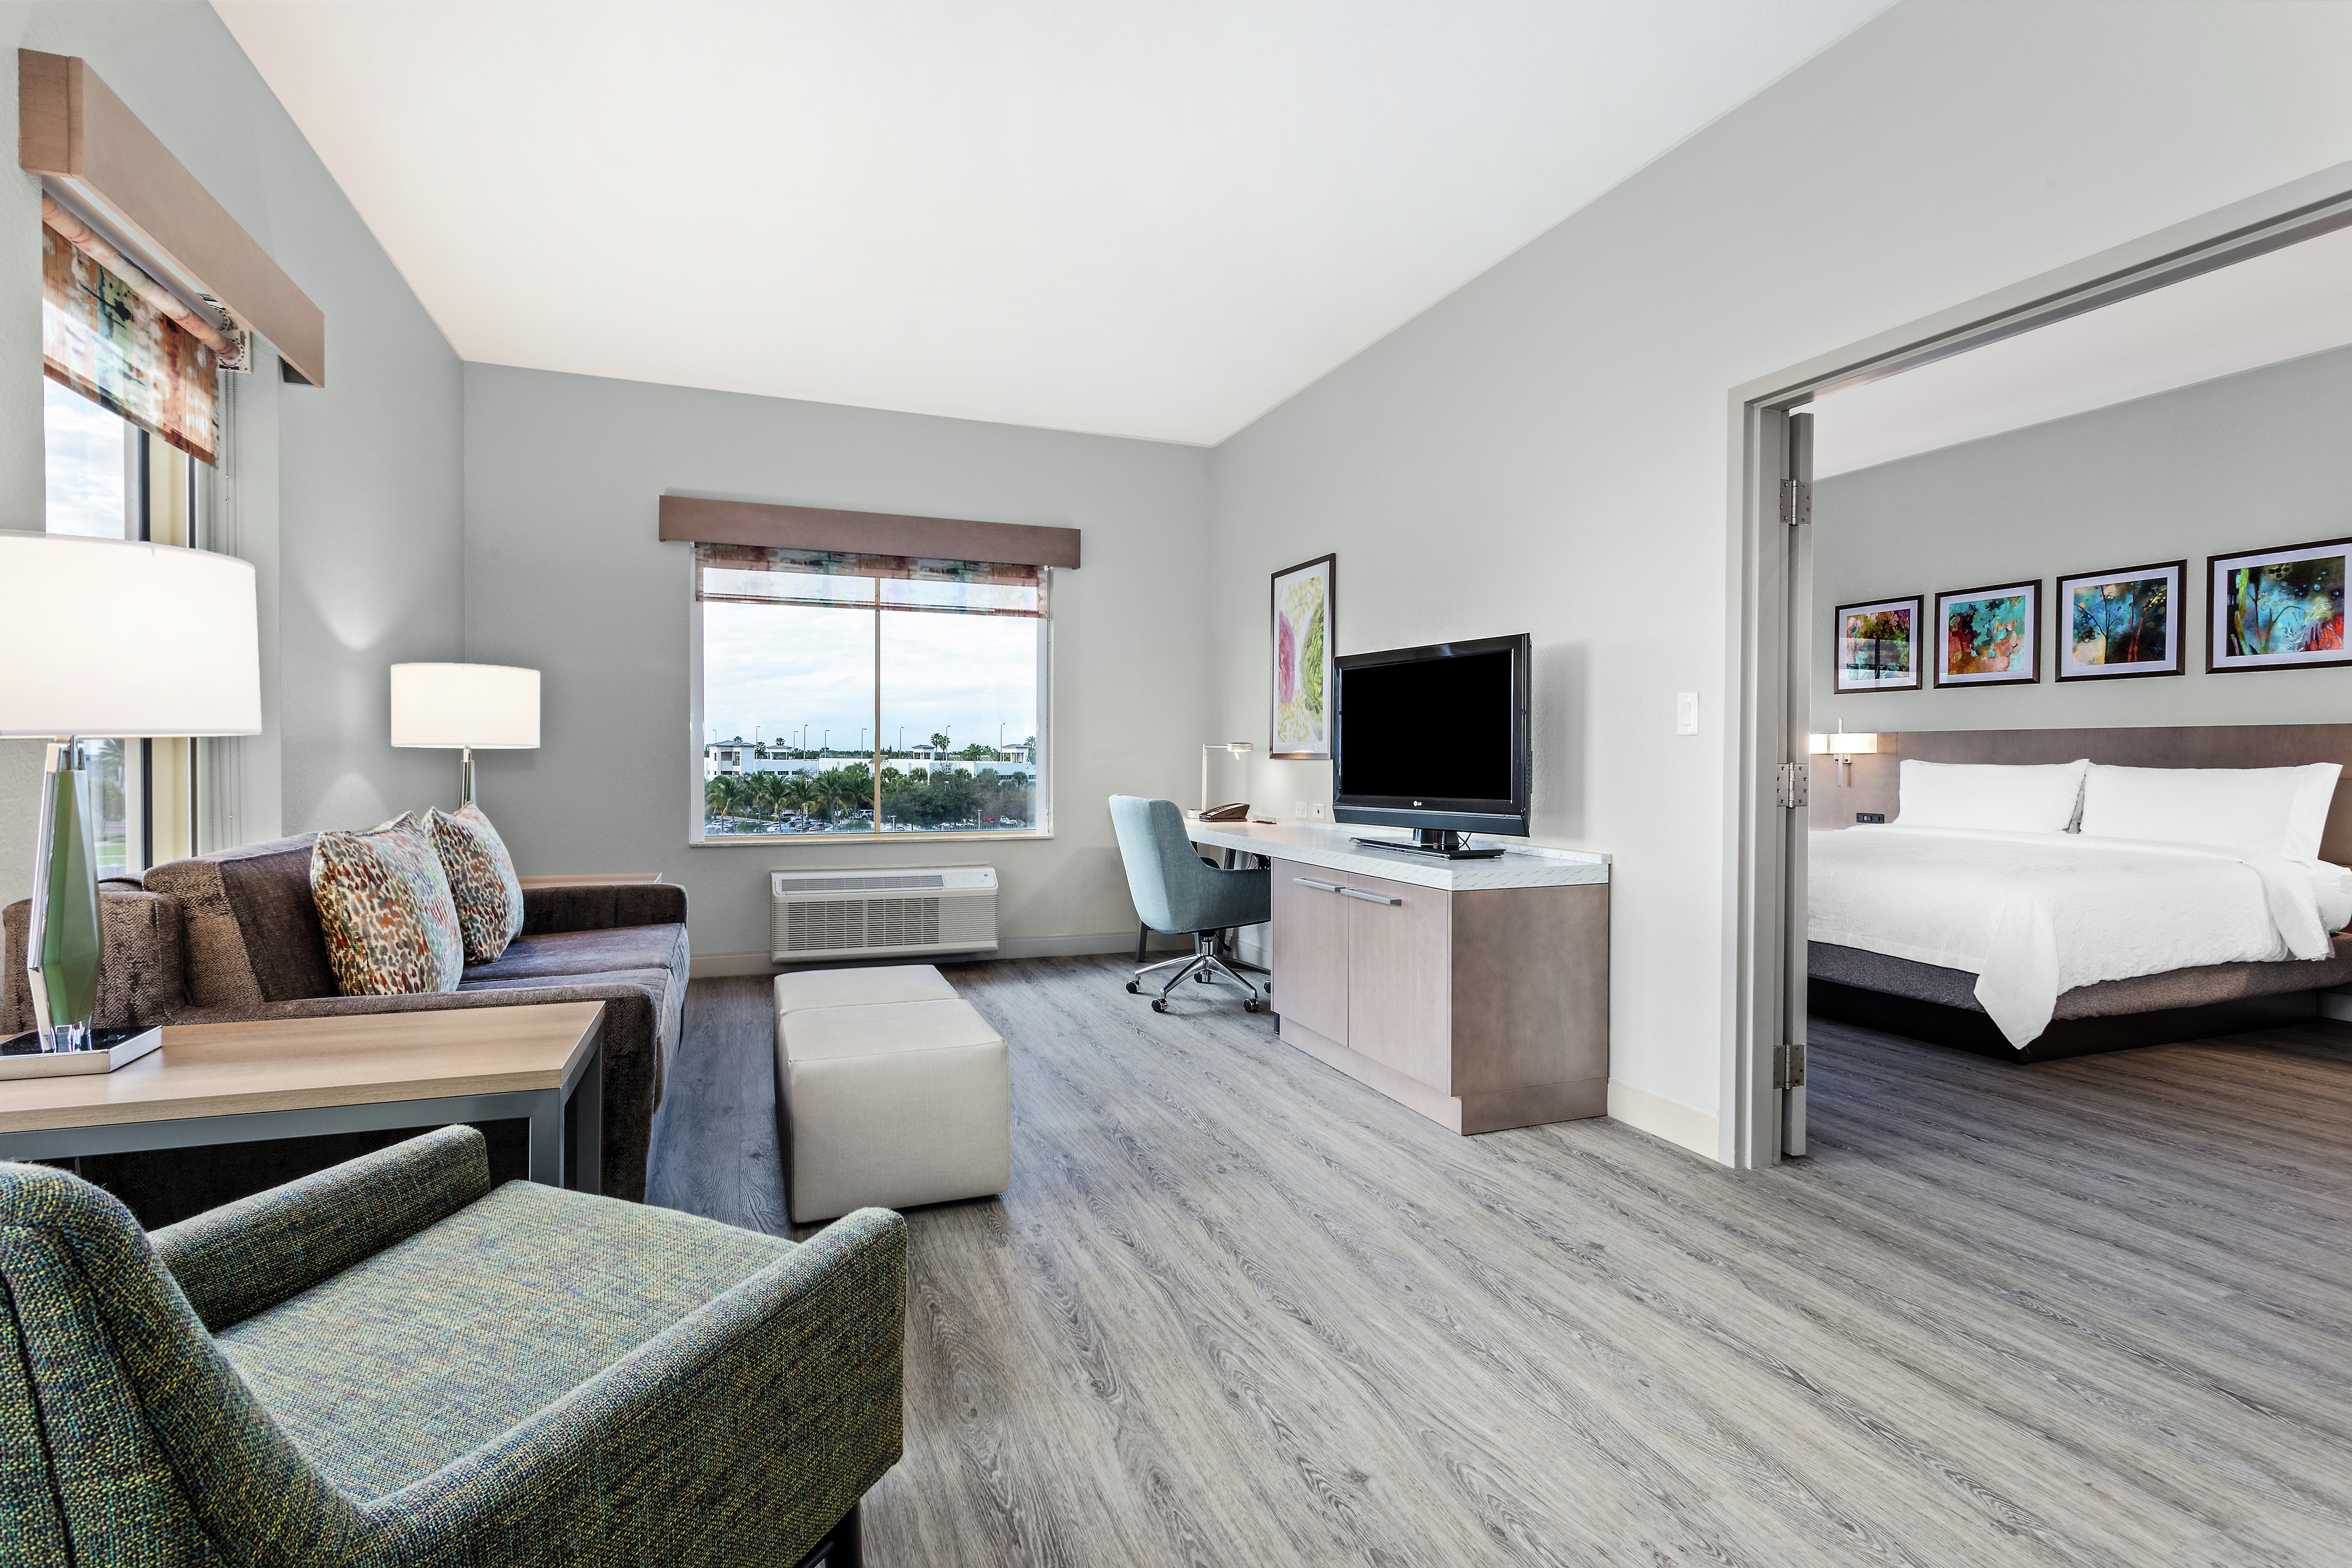 King Junior Suite Guestroom with Lounge Area, Outside View, Work Desk, Room Technology, and Bed